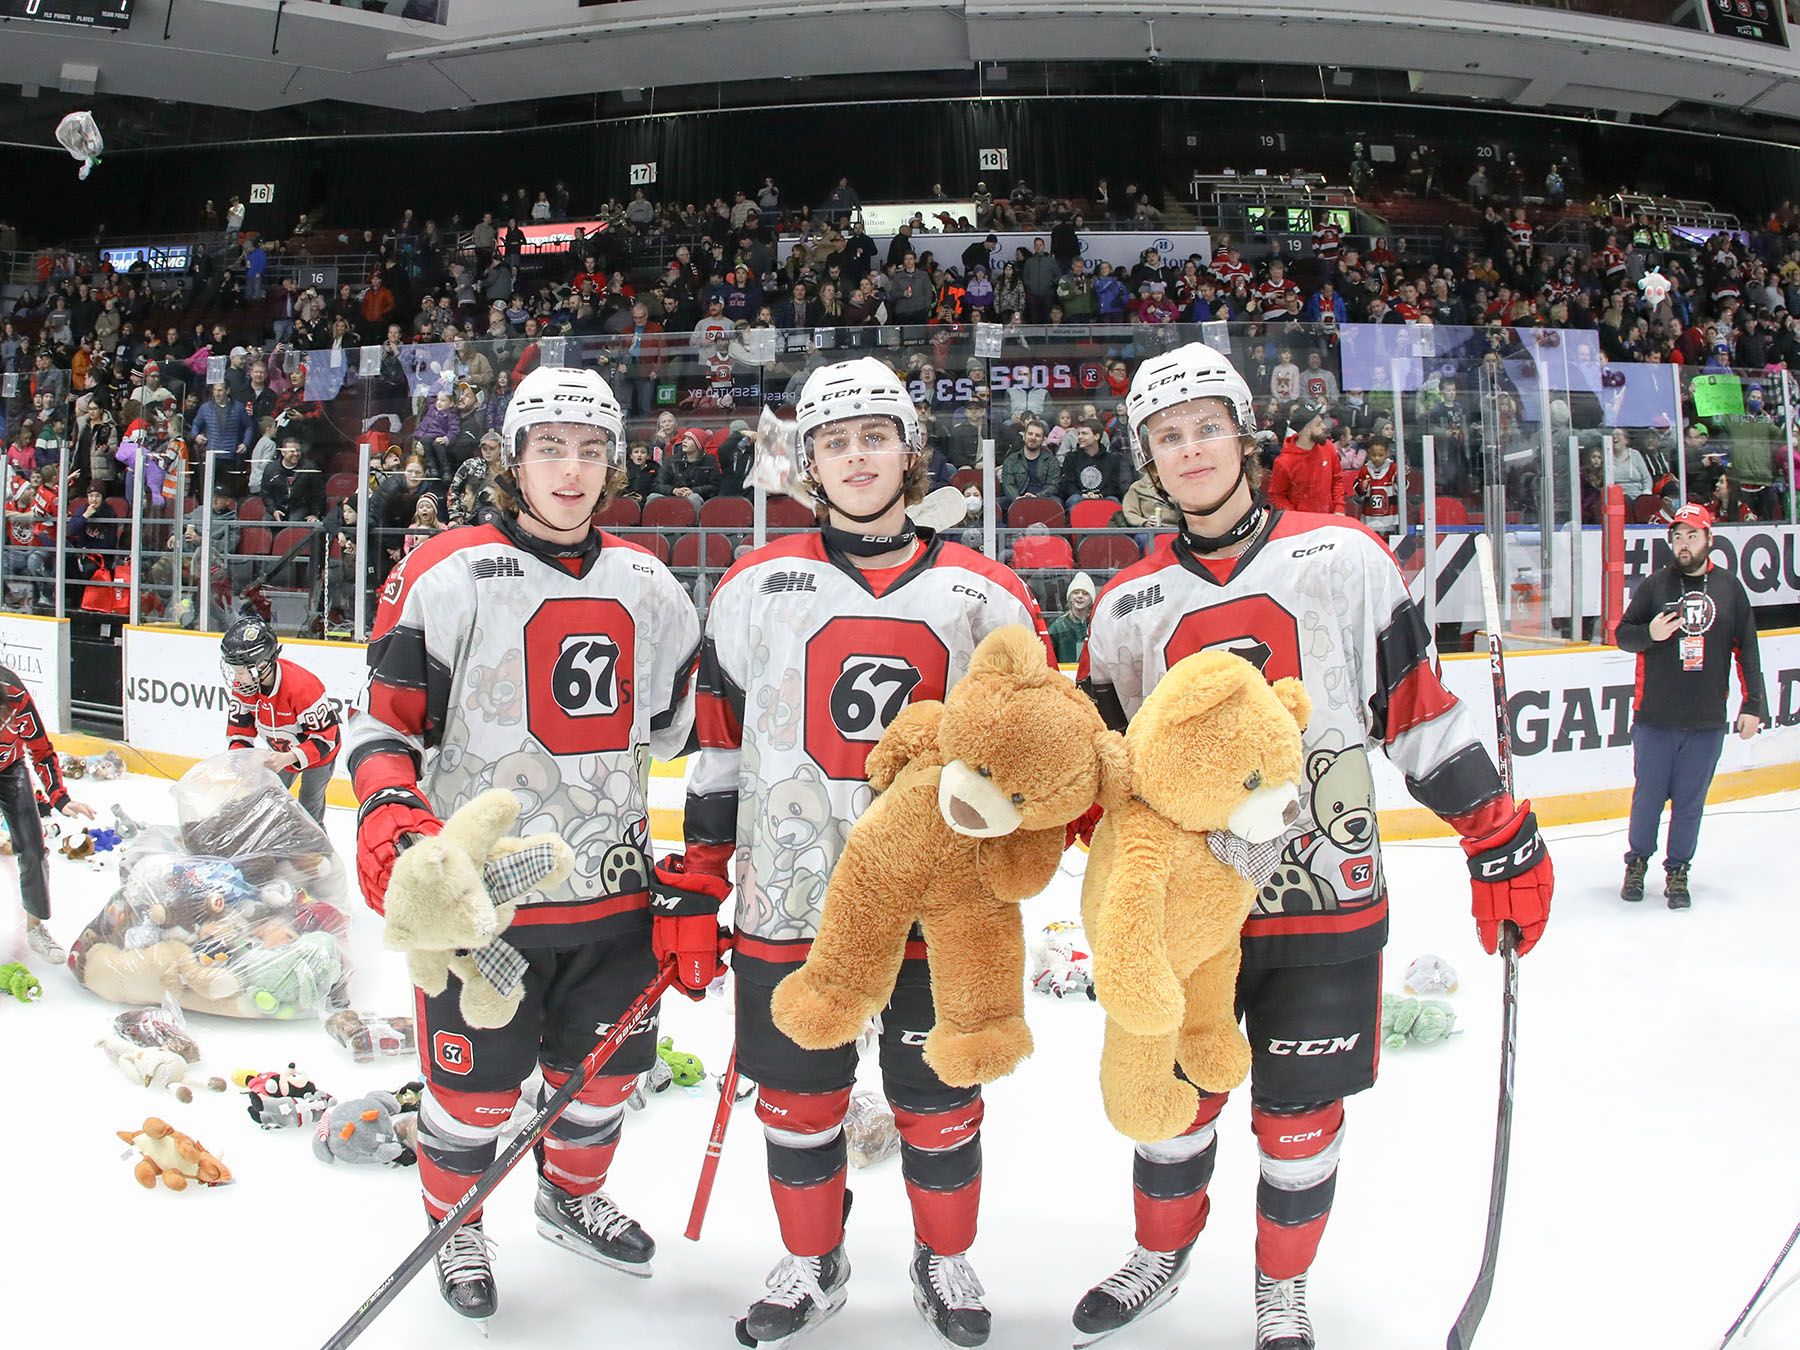 67’s familyfriendly atmosphere inspires the next generation of fans